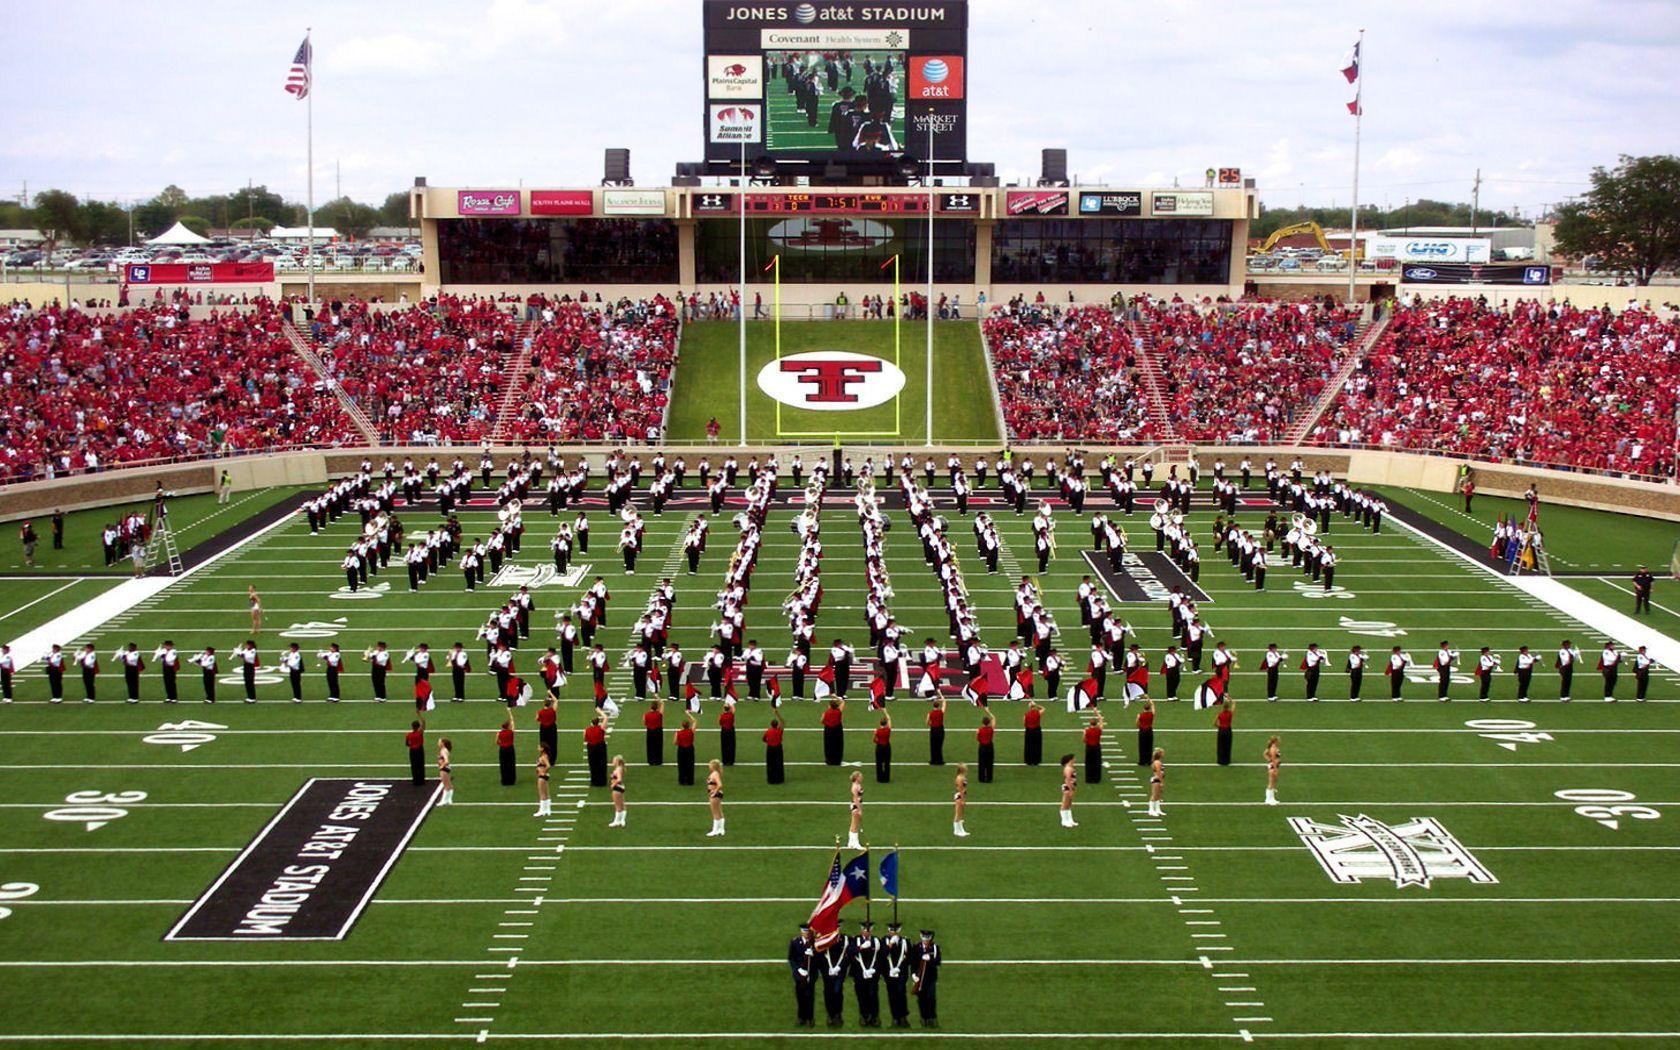 Background For Texas Tech University Background